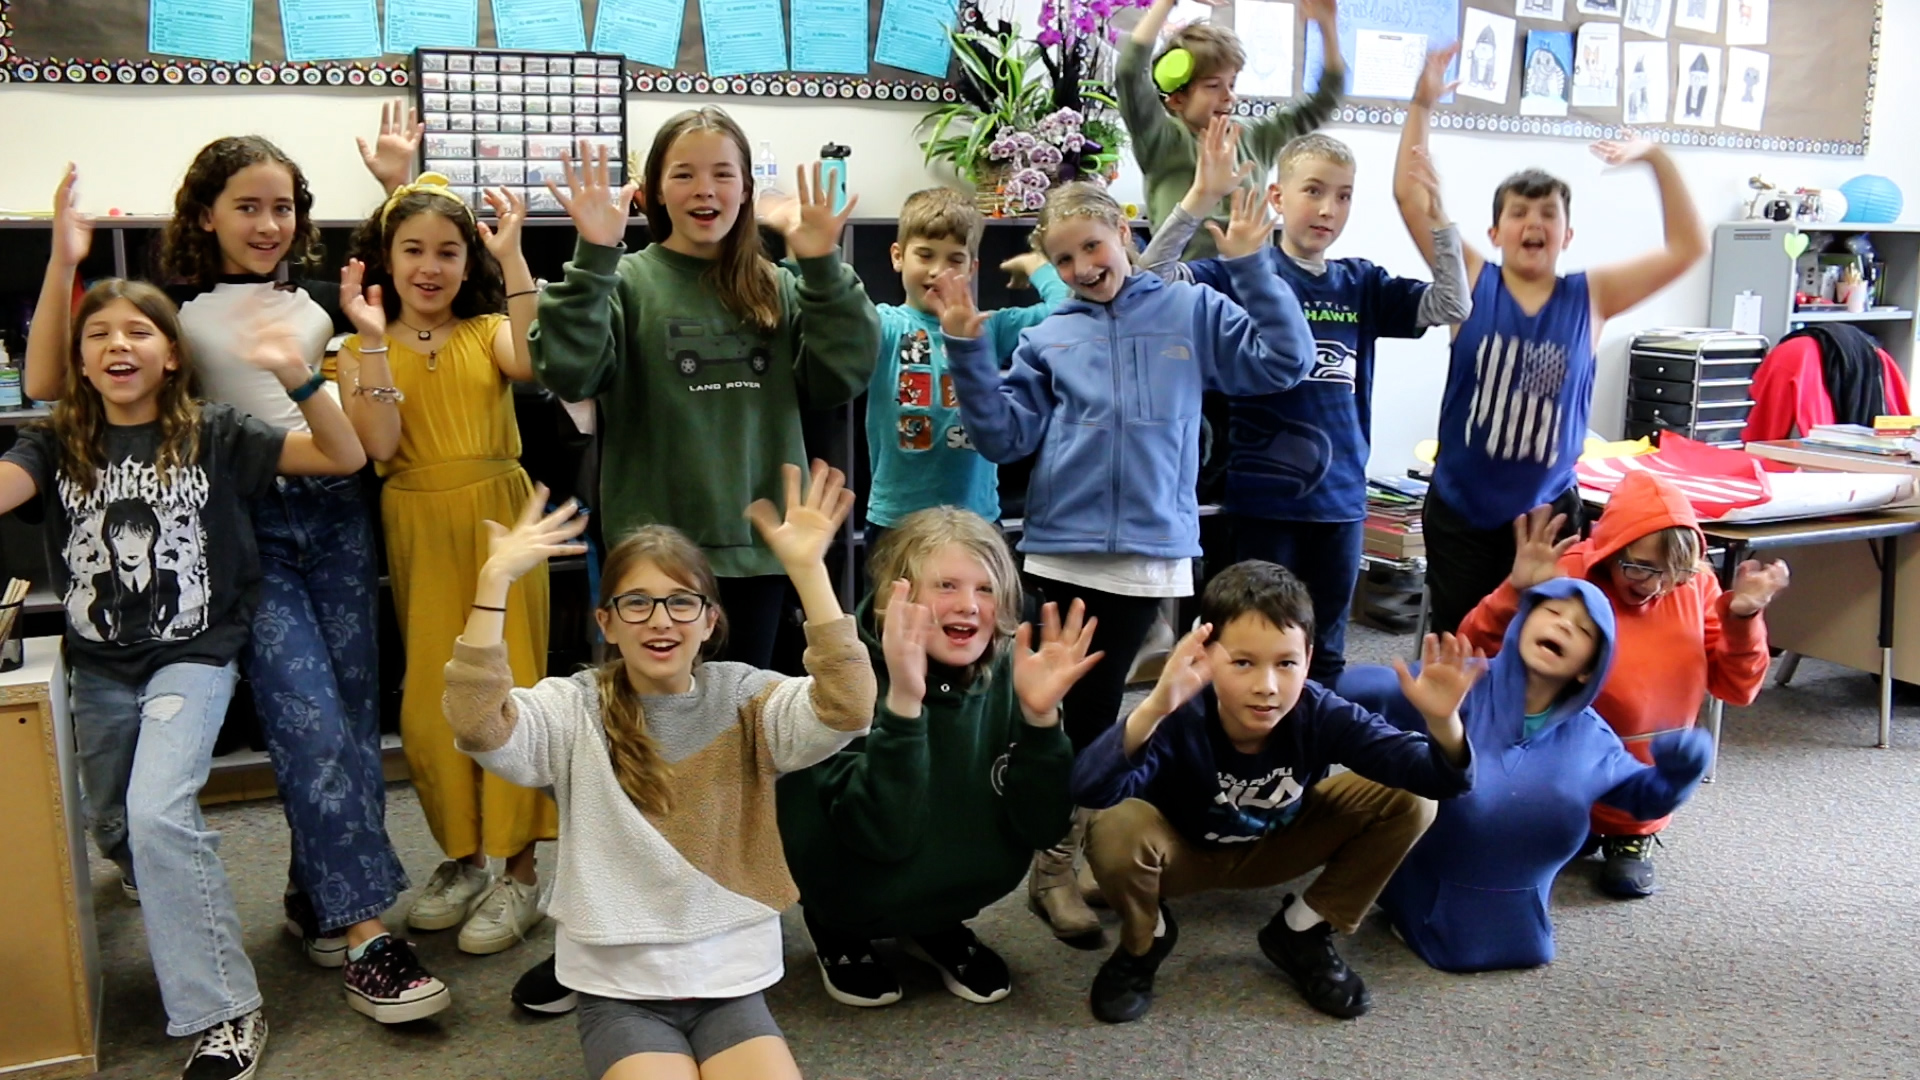 Group of 5th grade students wave at camera and smile